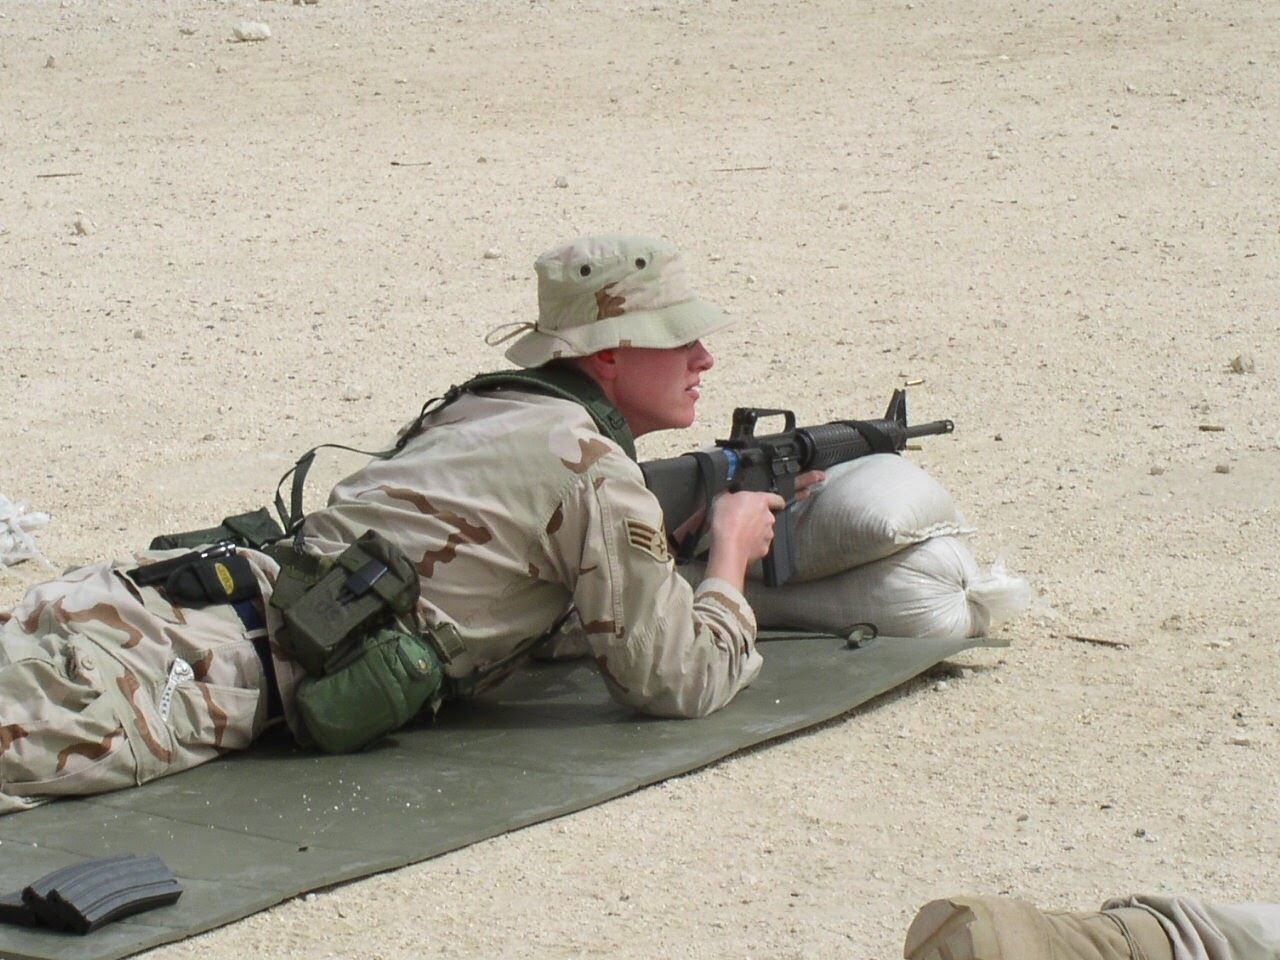 Weapons qualification in Qatar in 2002; two men on camels walked across the active firing range